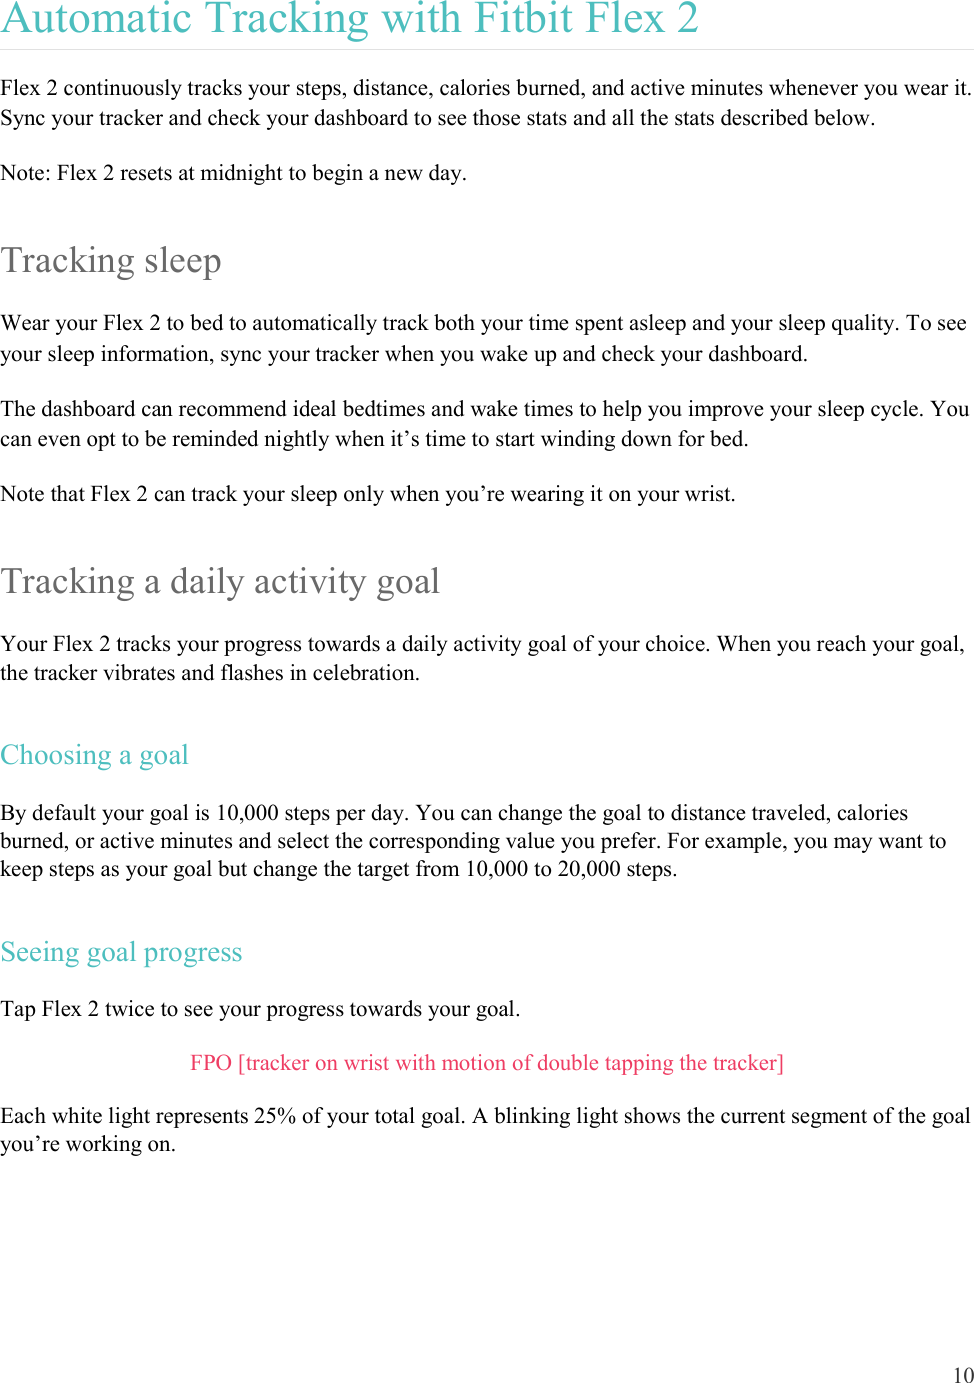 10  Automatic Tracking with Fitbit Flex 2 Flex 2 continuously tracks your steps, distance, calories burned, and active minutes whenever you wear it. Sync your tracker and check your dashboard to see those stats and all the stats described below.  Note: Flex 2 resets at midnight to begin a new day.  Tracking sleep Wear your Flex 2 to bed to automatically track both your time spent asleep and your sleep quality. To see your sleep information, sync your tracker when you wake up and check your dashboard.  The dashboard can recommend ideal bedtimes and wake times to help you improve your sleep cycle. You can even opt to be reminded nightly when it’s time to start winding down for bed.  Note that Flex 2 can track your sleep only when you’re wearing it on your wrist.  Tracking a daily activity goal Your Flex 2 tracks your progress towards a daily activity goal of your choice. When you reach your goal, the tracker vibrates and flashes in celebration. Choosing a goal By default your goal is 10,000 steps per day. You can change the goal to distance traveled, calories burned, or active minutes and select the corresponding value you prefer. For example, you may want to keep steps as your goal but change the target from 10,000 to 20,000 steps. Seeing goal progress Tap Flex 2 twice to see your progress towards your goal.  FPO [tracker on wrist with motion of double tapping the tracker] Each white light represents 25% of your total goal. A blinking light shows the current segment of the goal you’re working on.  